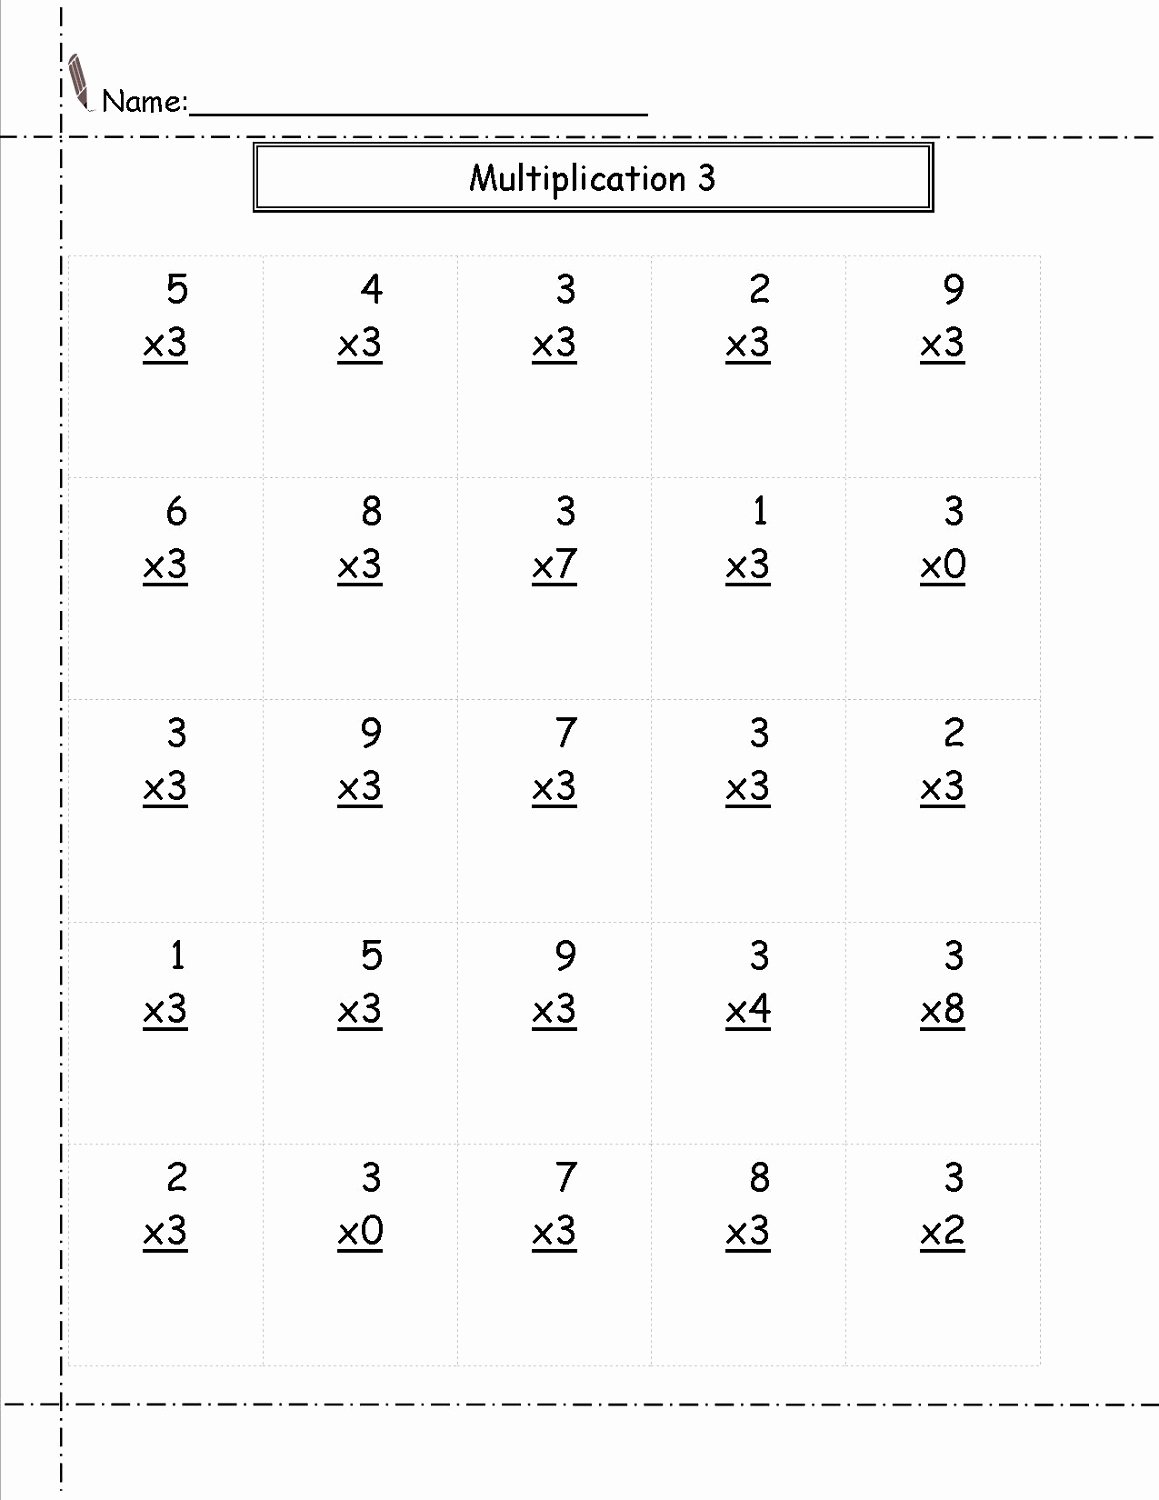 3 Times Table Worksheet Awesome 3 Times Table Worksheets to Print